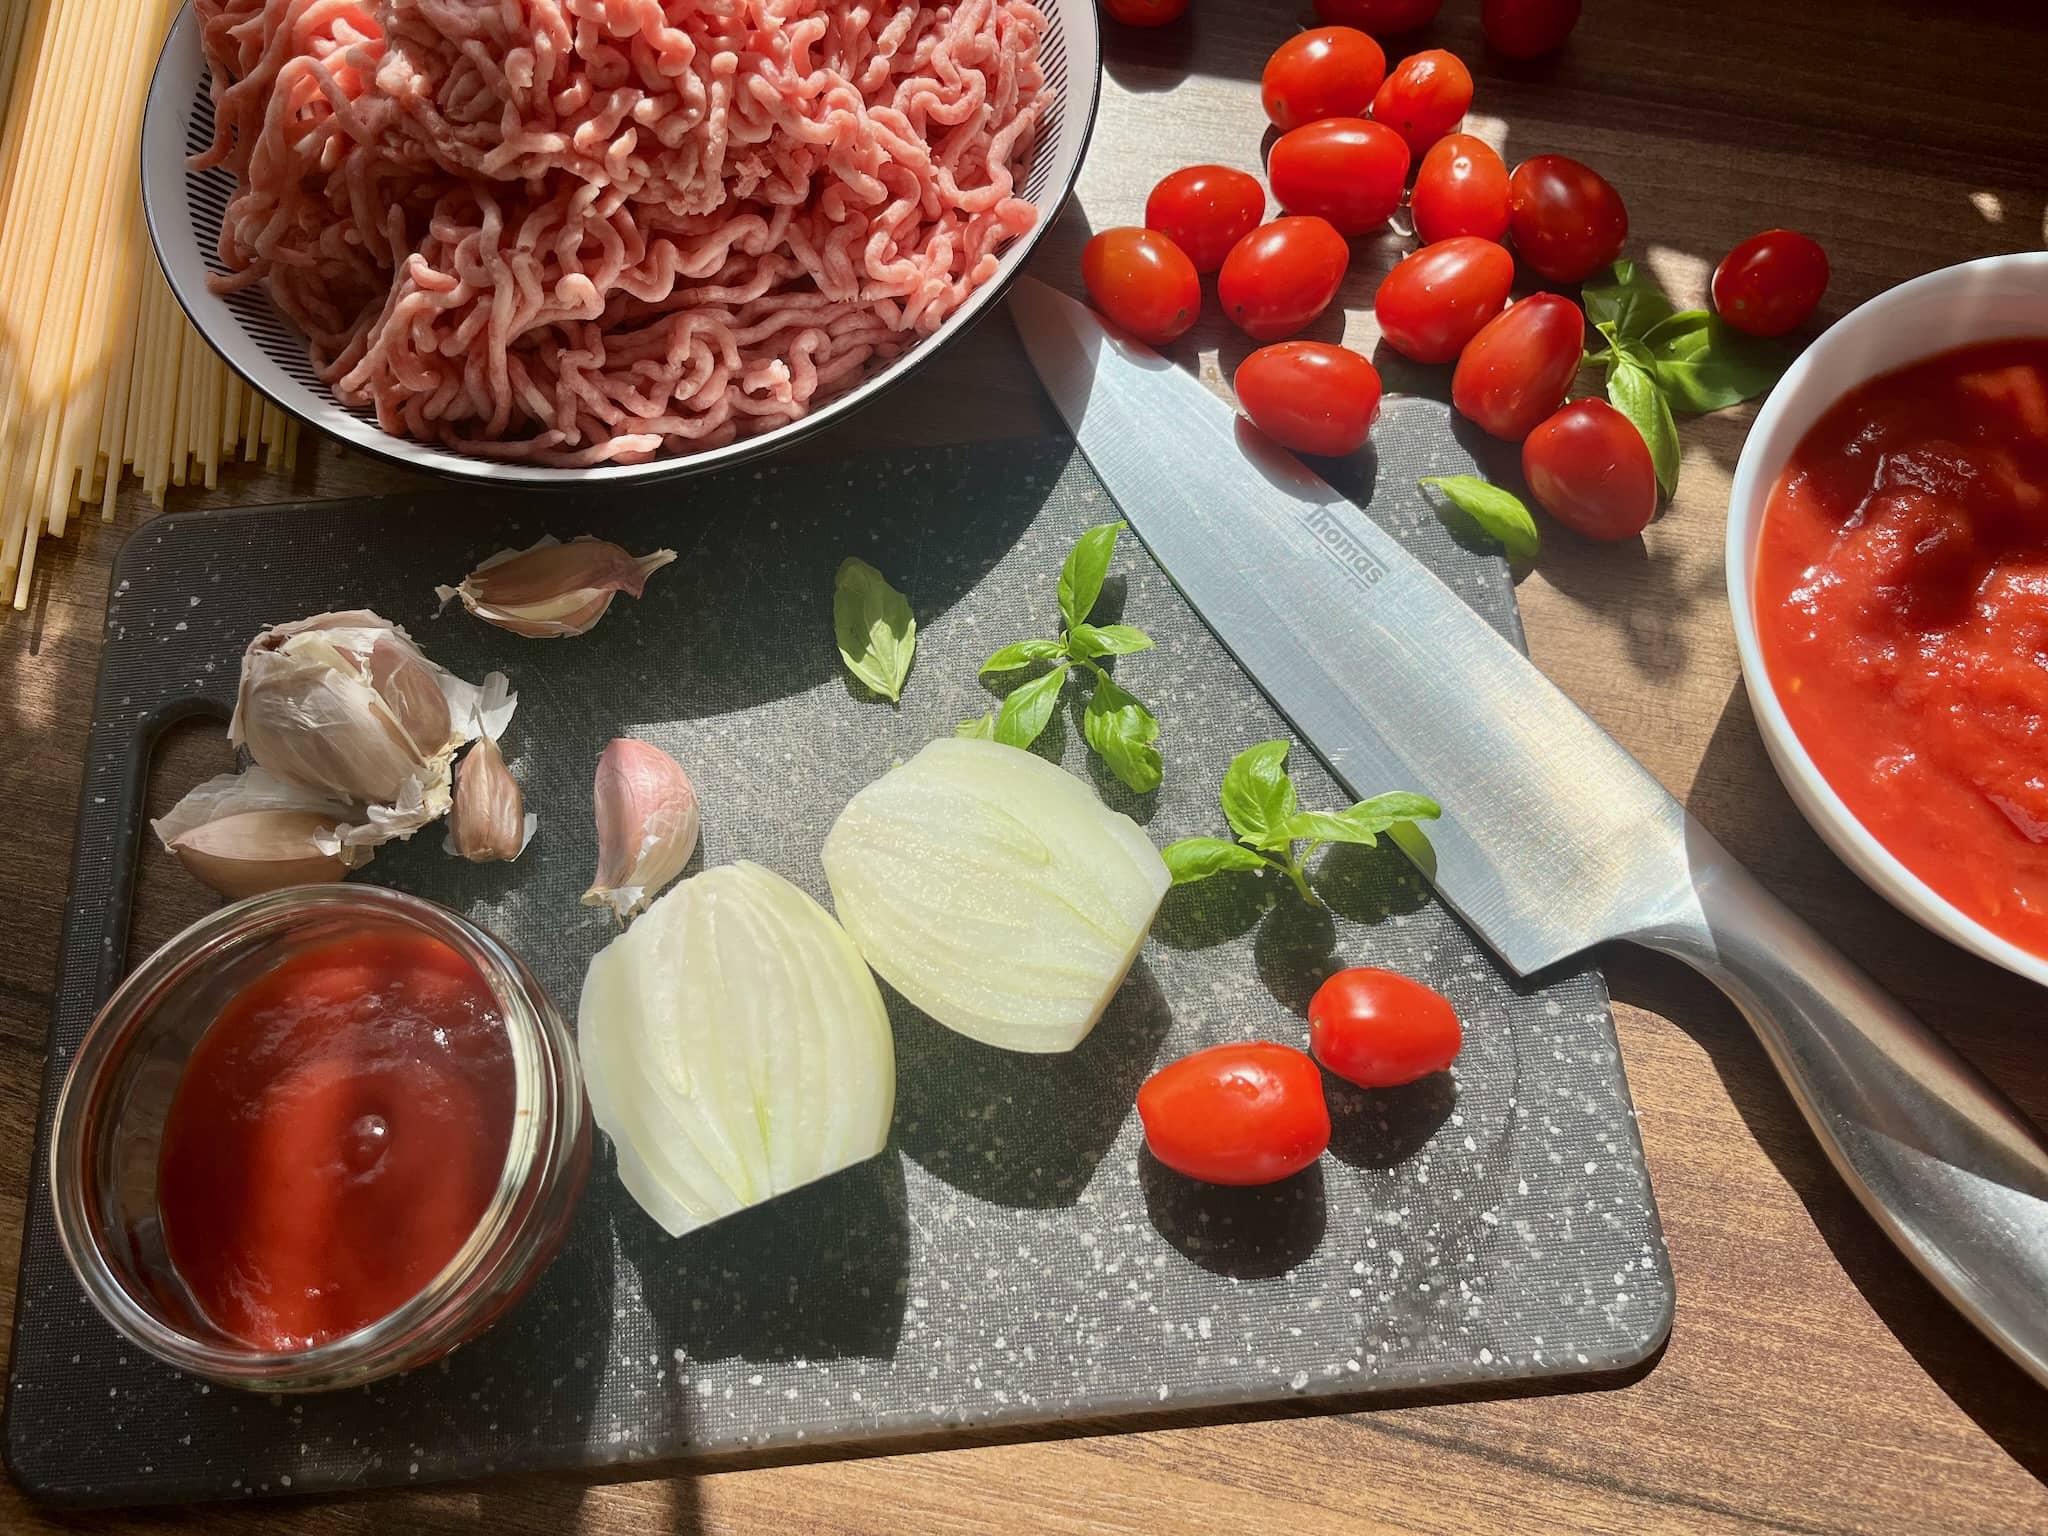 Minced meat and chopped tomatoes in a bowl, plum tomatoes, garlic and onion on a chopping board with ketchup on a side.